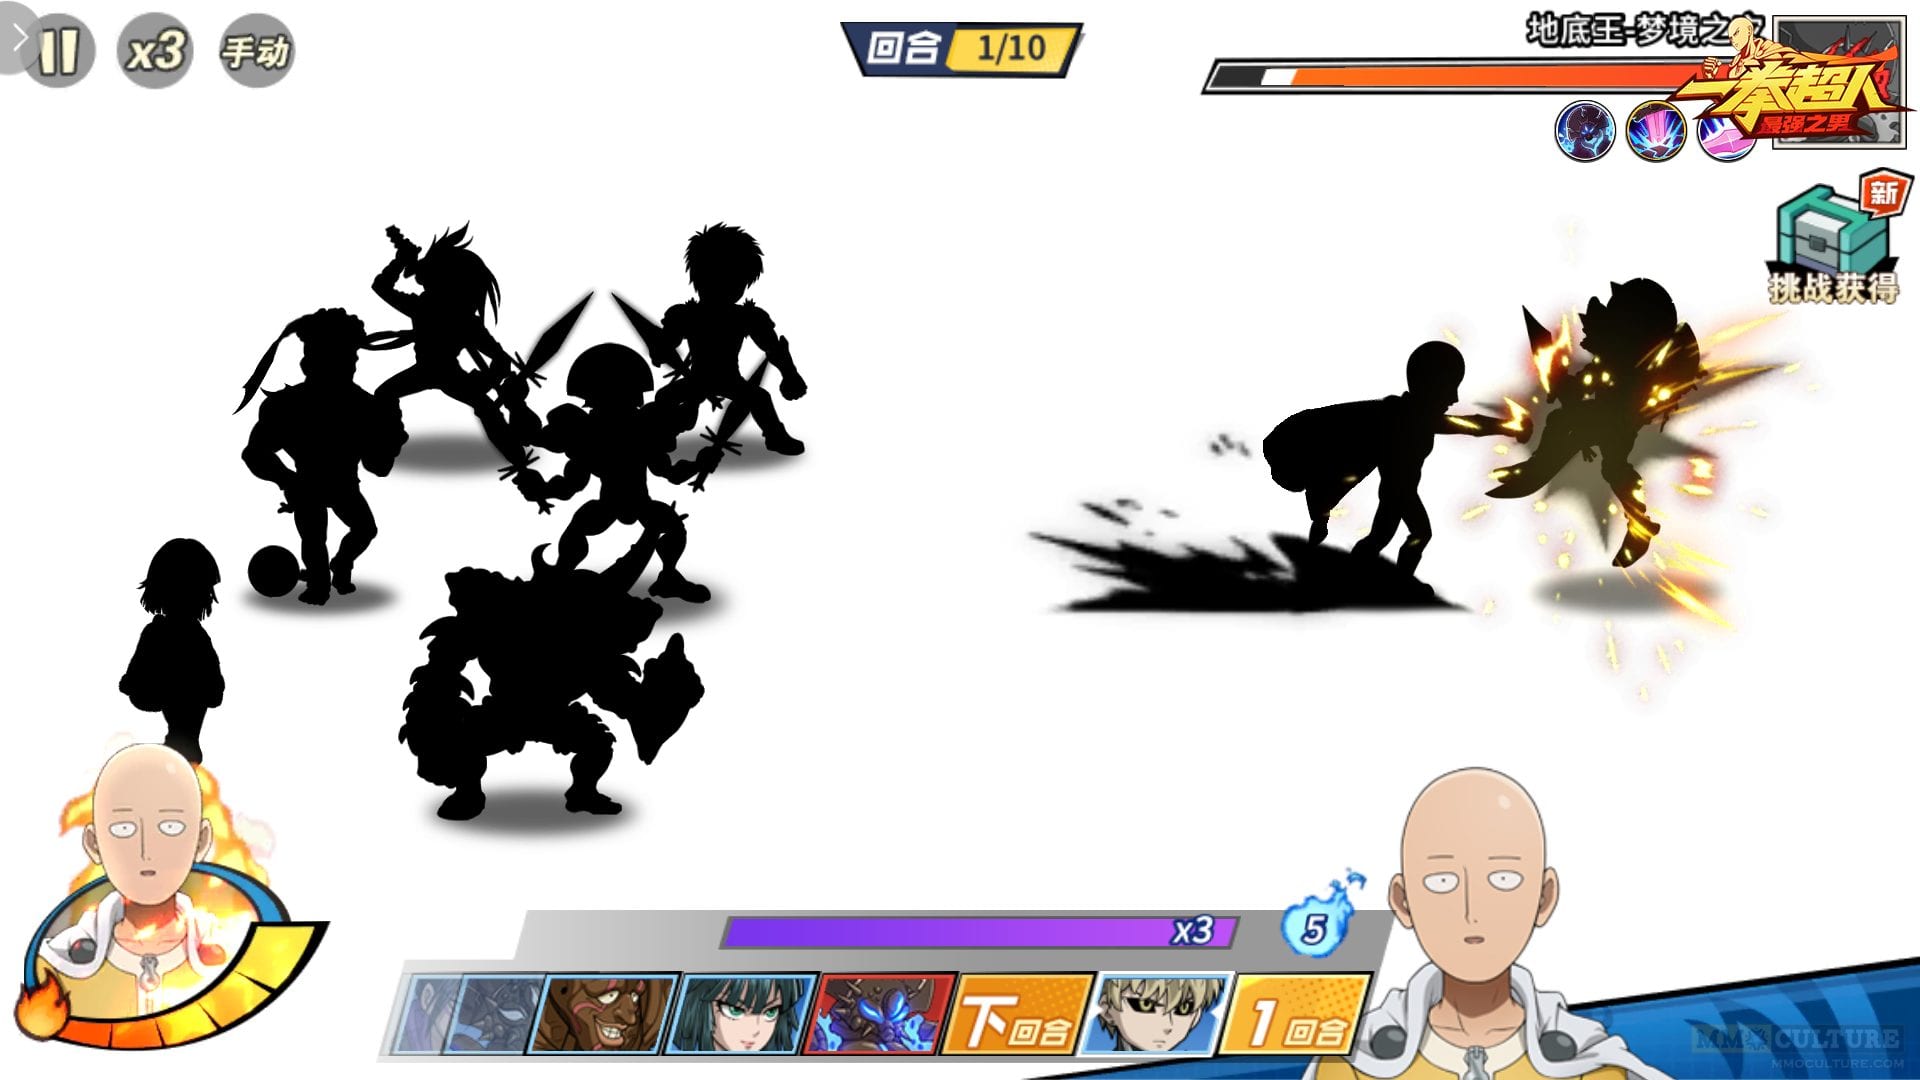 One Punch Man The Strongest Man Brief Walkthrough Of New China Exclusive Mobile Game Mmo Culture